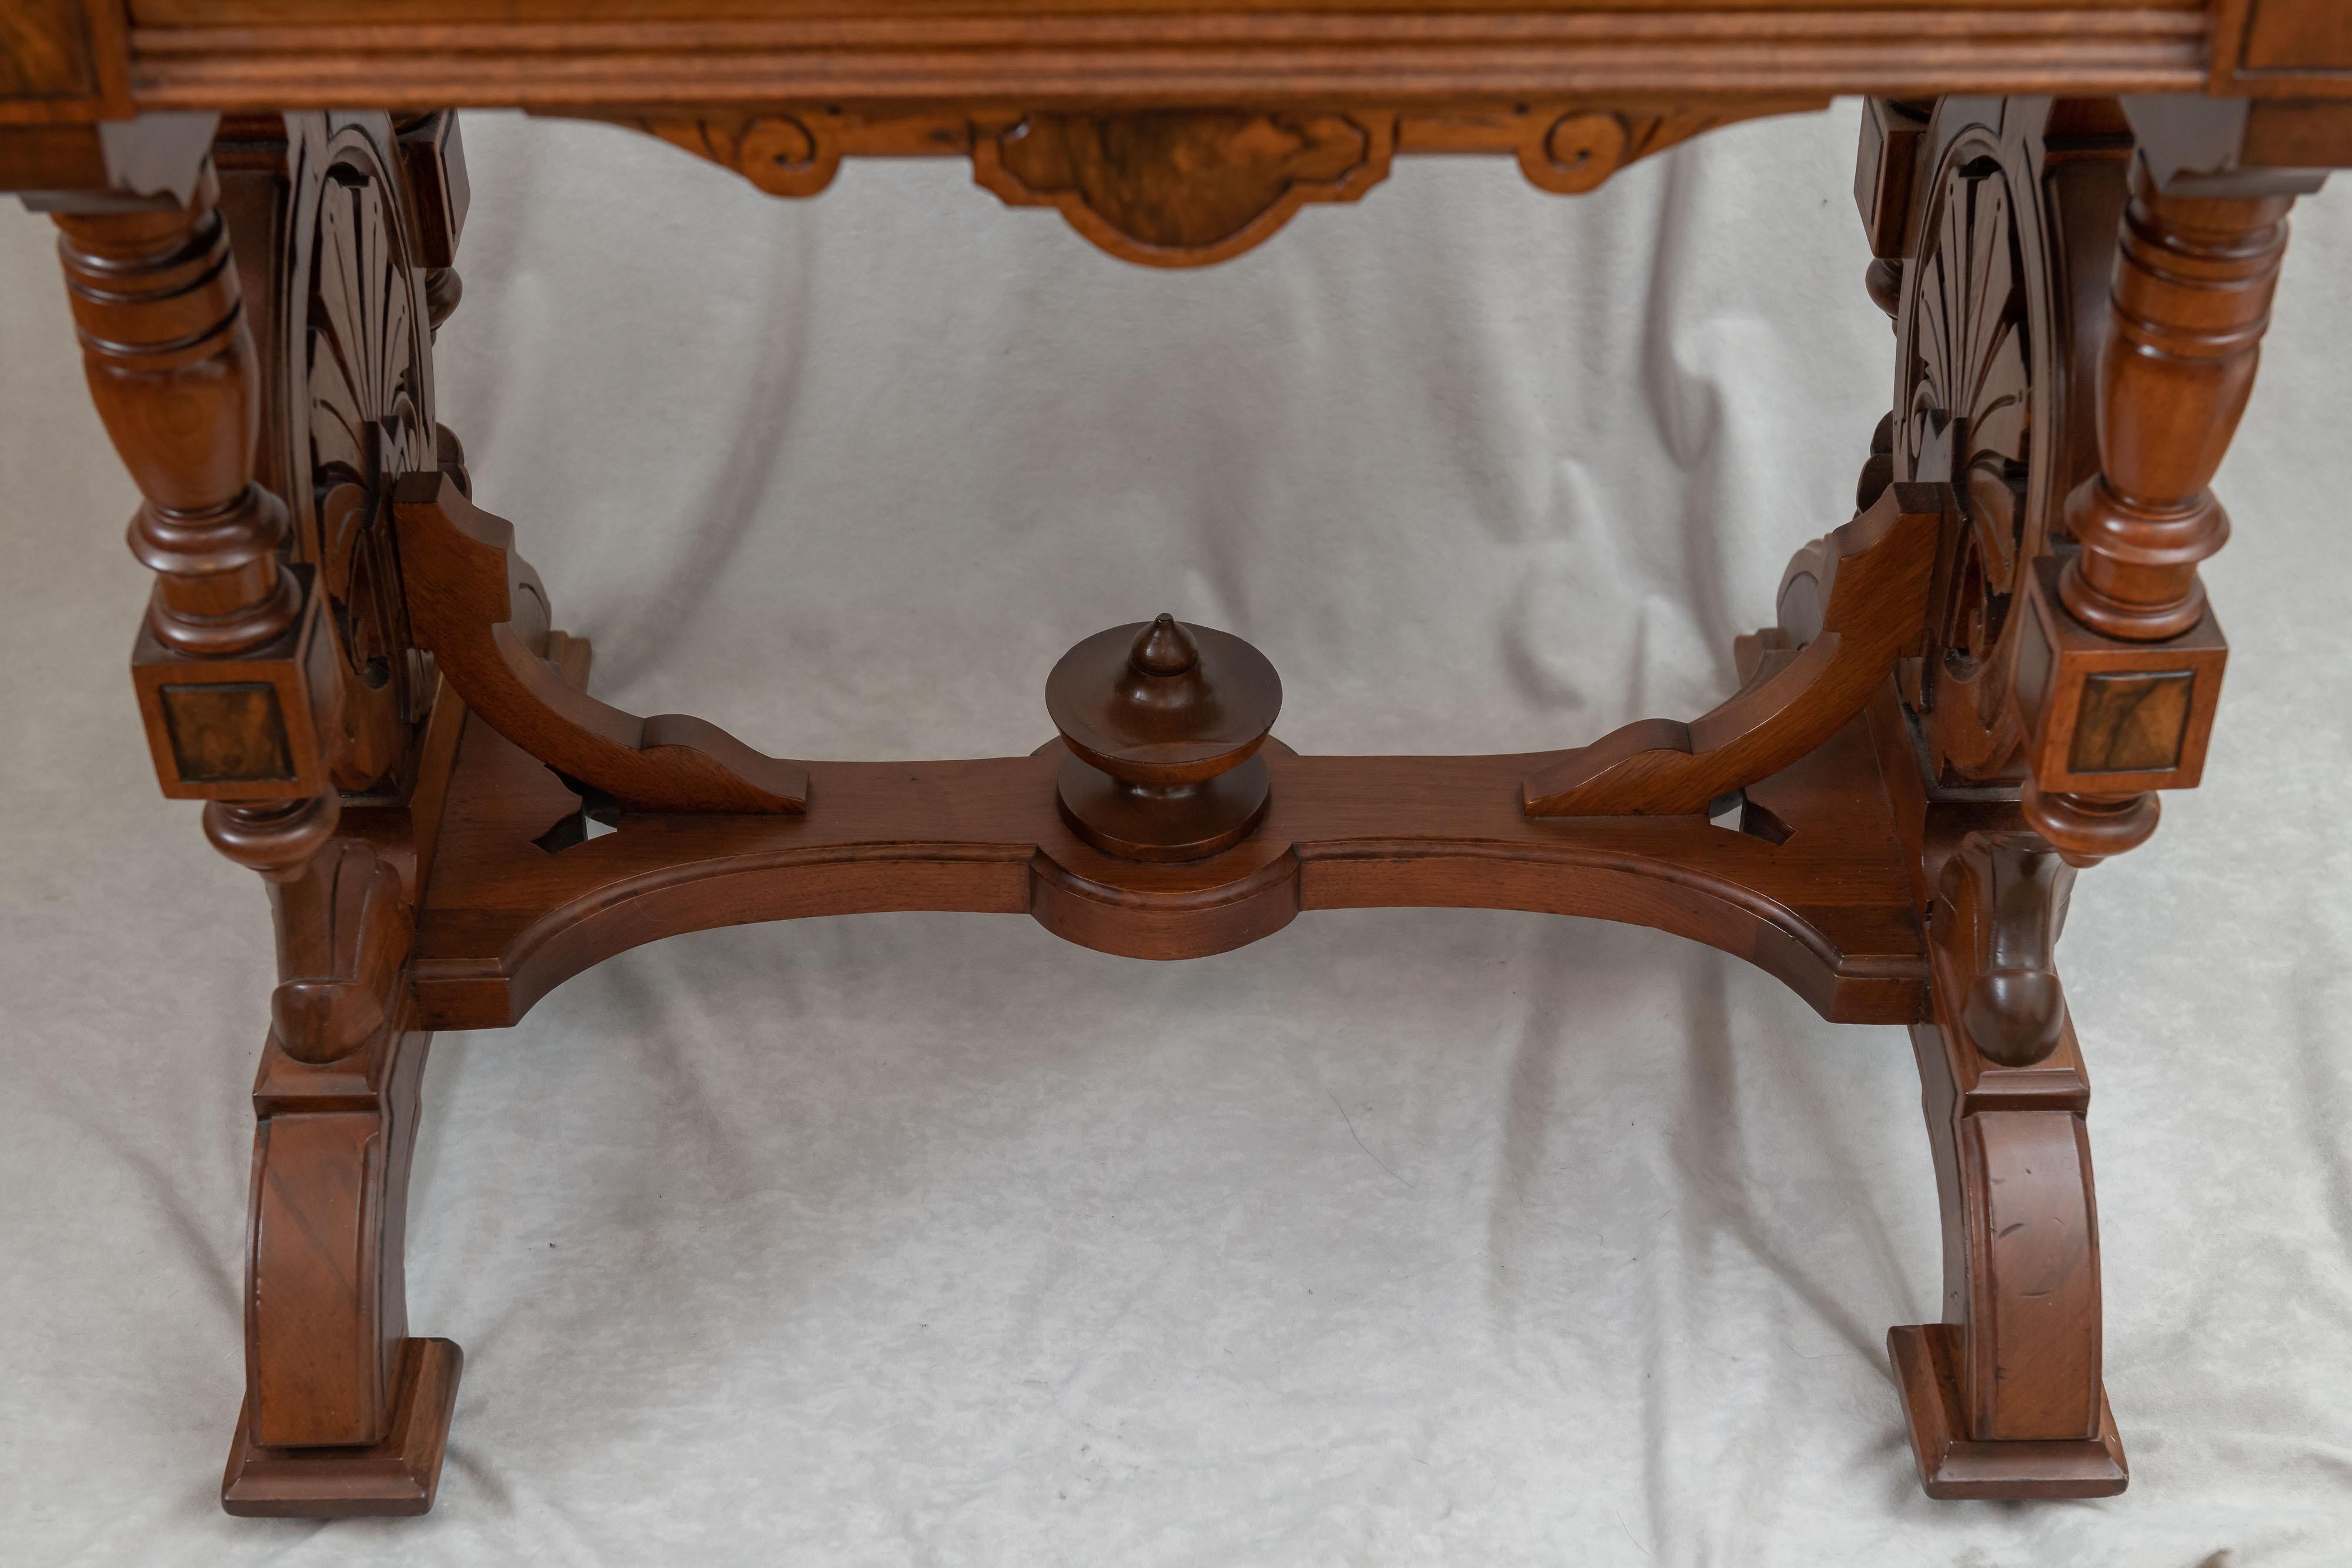 American Renaissance Revival Walnut & Burl Writing Table w/ Leather Top, ca. 1870